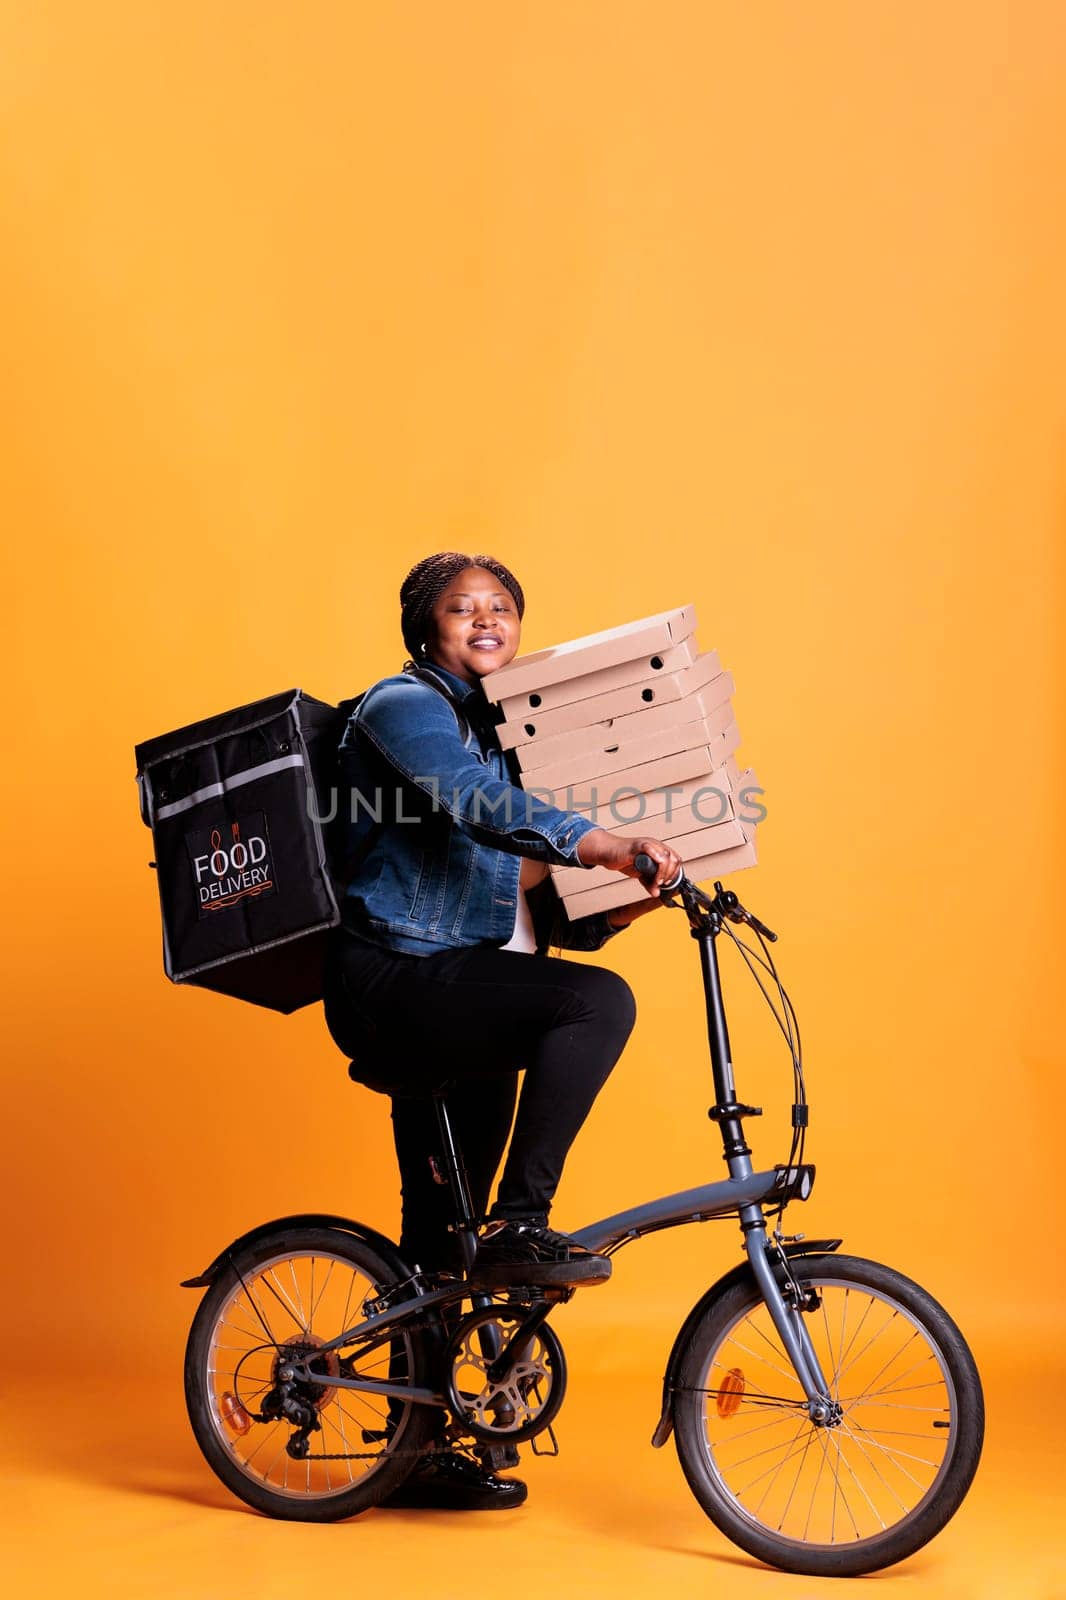 Restaurant worker riding bike while carrying stack of pizza delivering takeaway food meal to customer Pizzeria employee standing in studio with yellow background. Food service and transportation